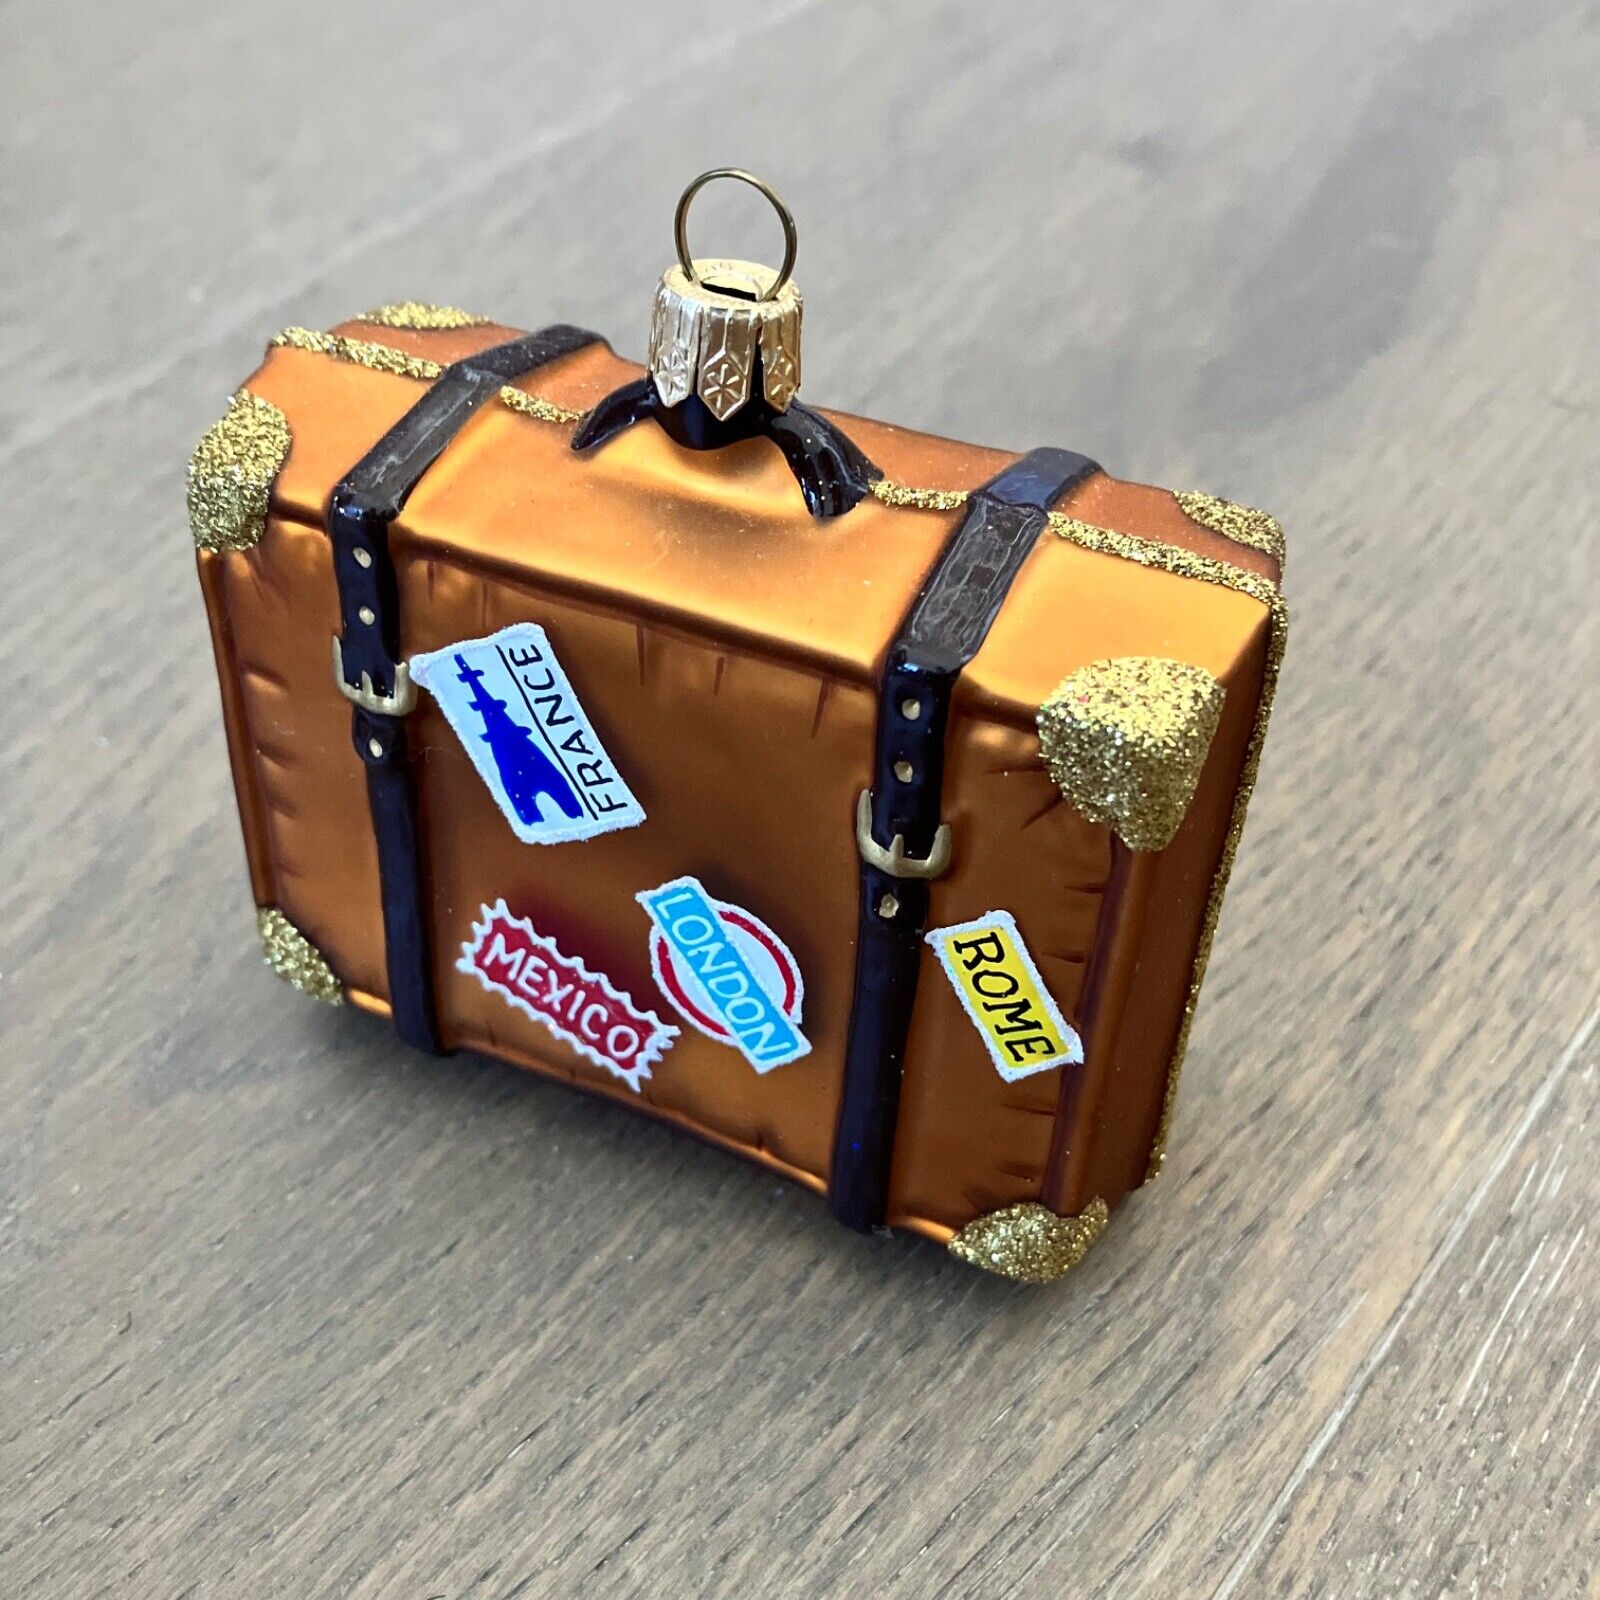 Orange Suitcase with Travel Stickers Christmas/Holiday Ornament - Blown Glass